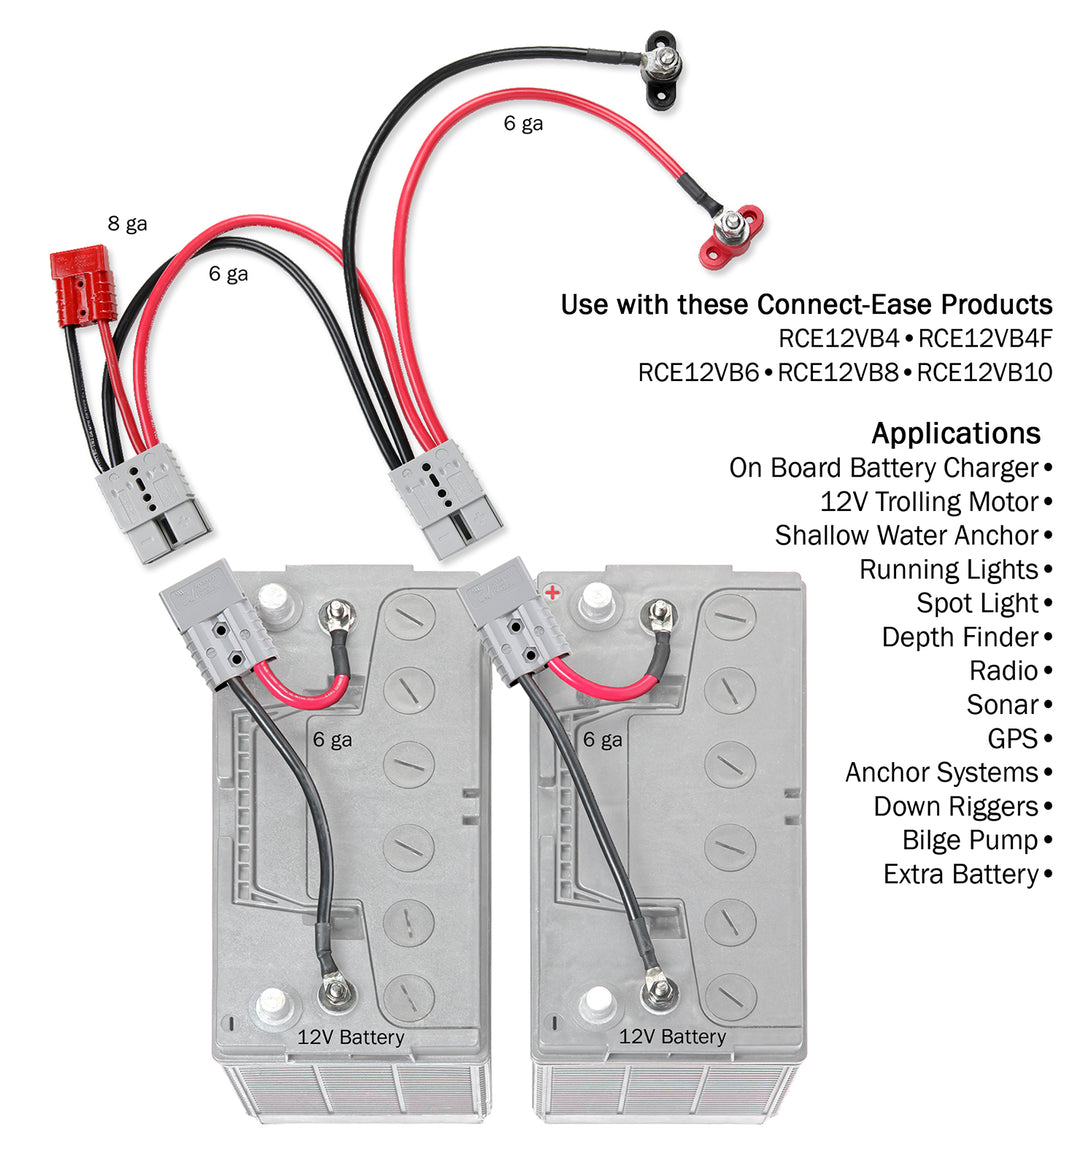 Outboard Motor Dual Battery Connection Kit 6 AWG - RCE12VBM6PK - Connect-Ease. Connect all your marine equipment with ease.